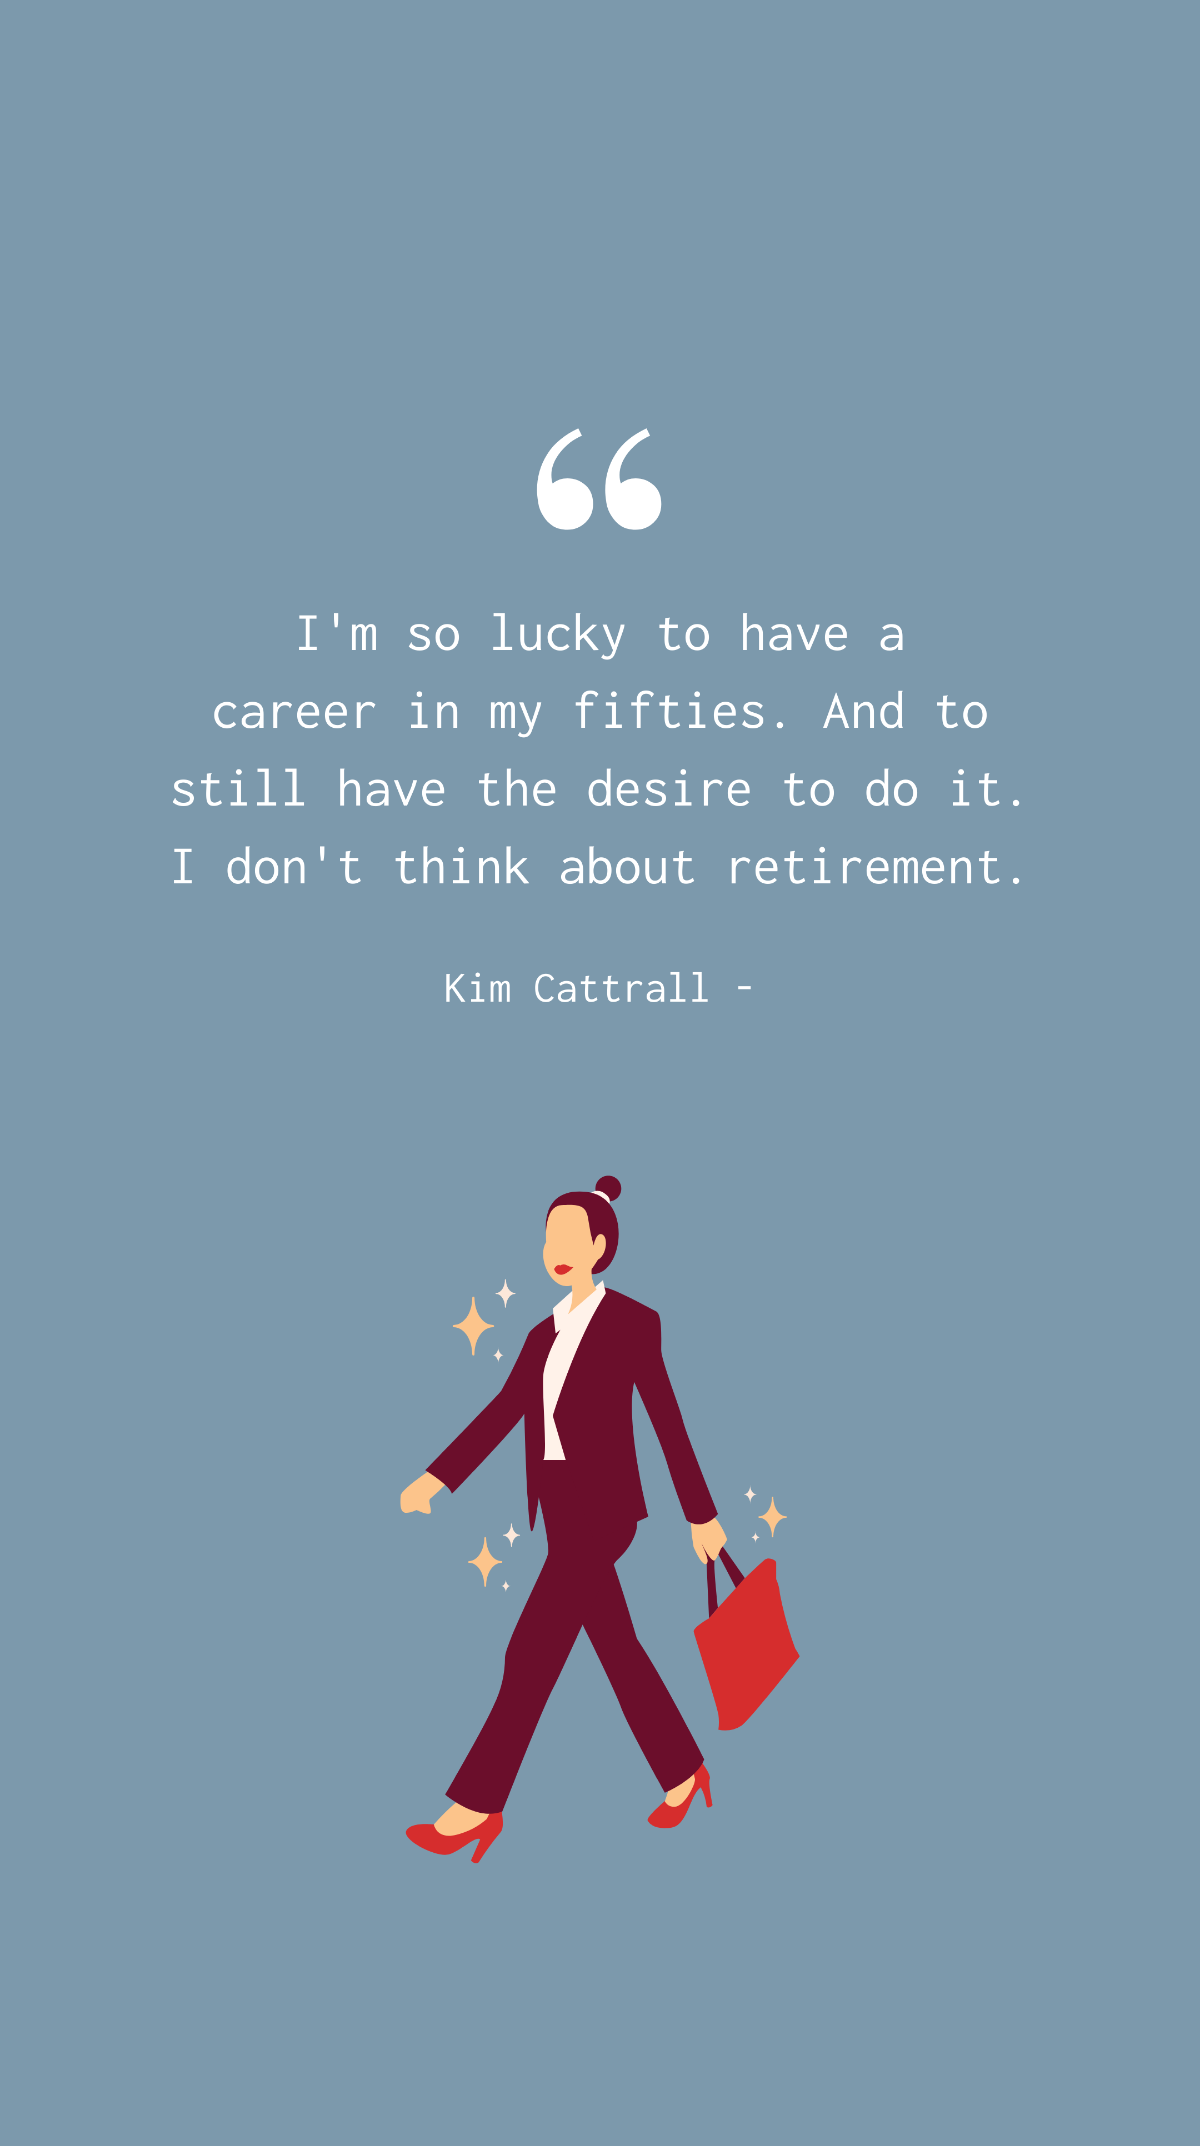 Kim Cattrall - I'm so lucky to have a career in my fifties. And to still have the desire to do it. I don't think about retirement. Template